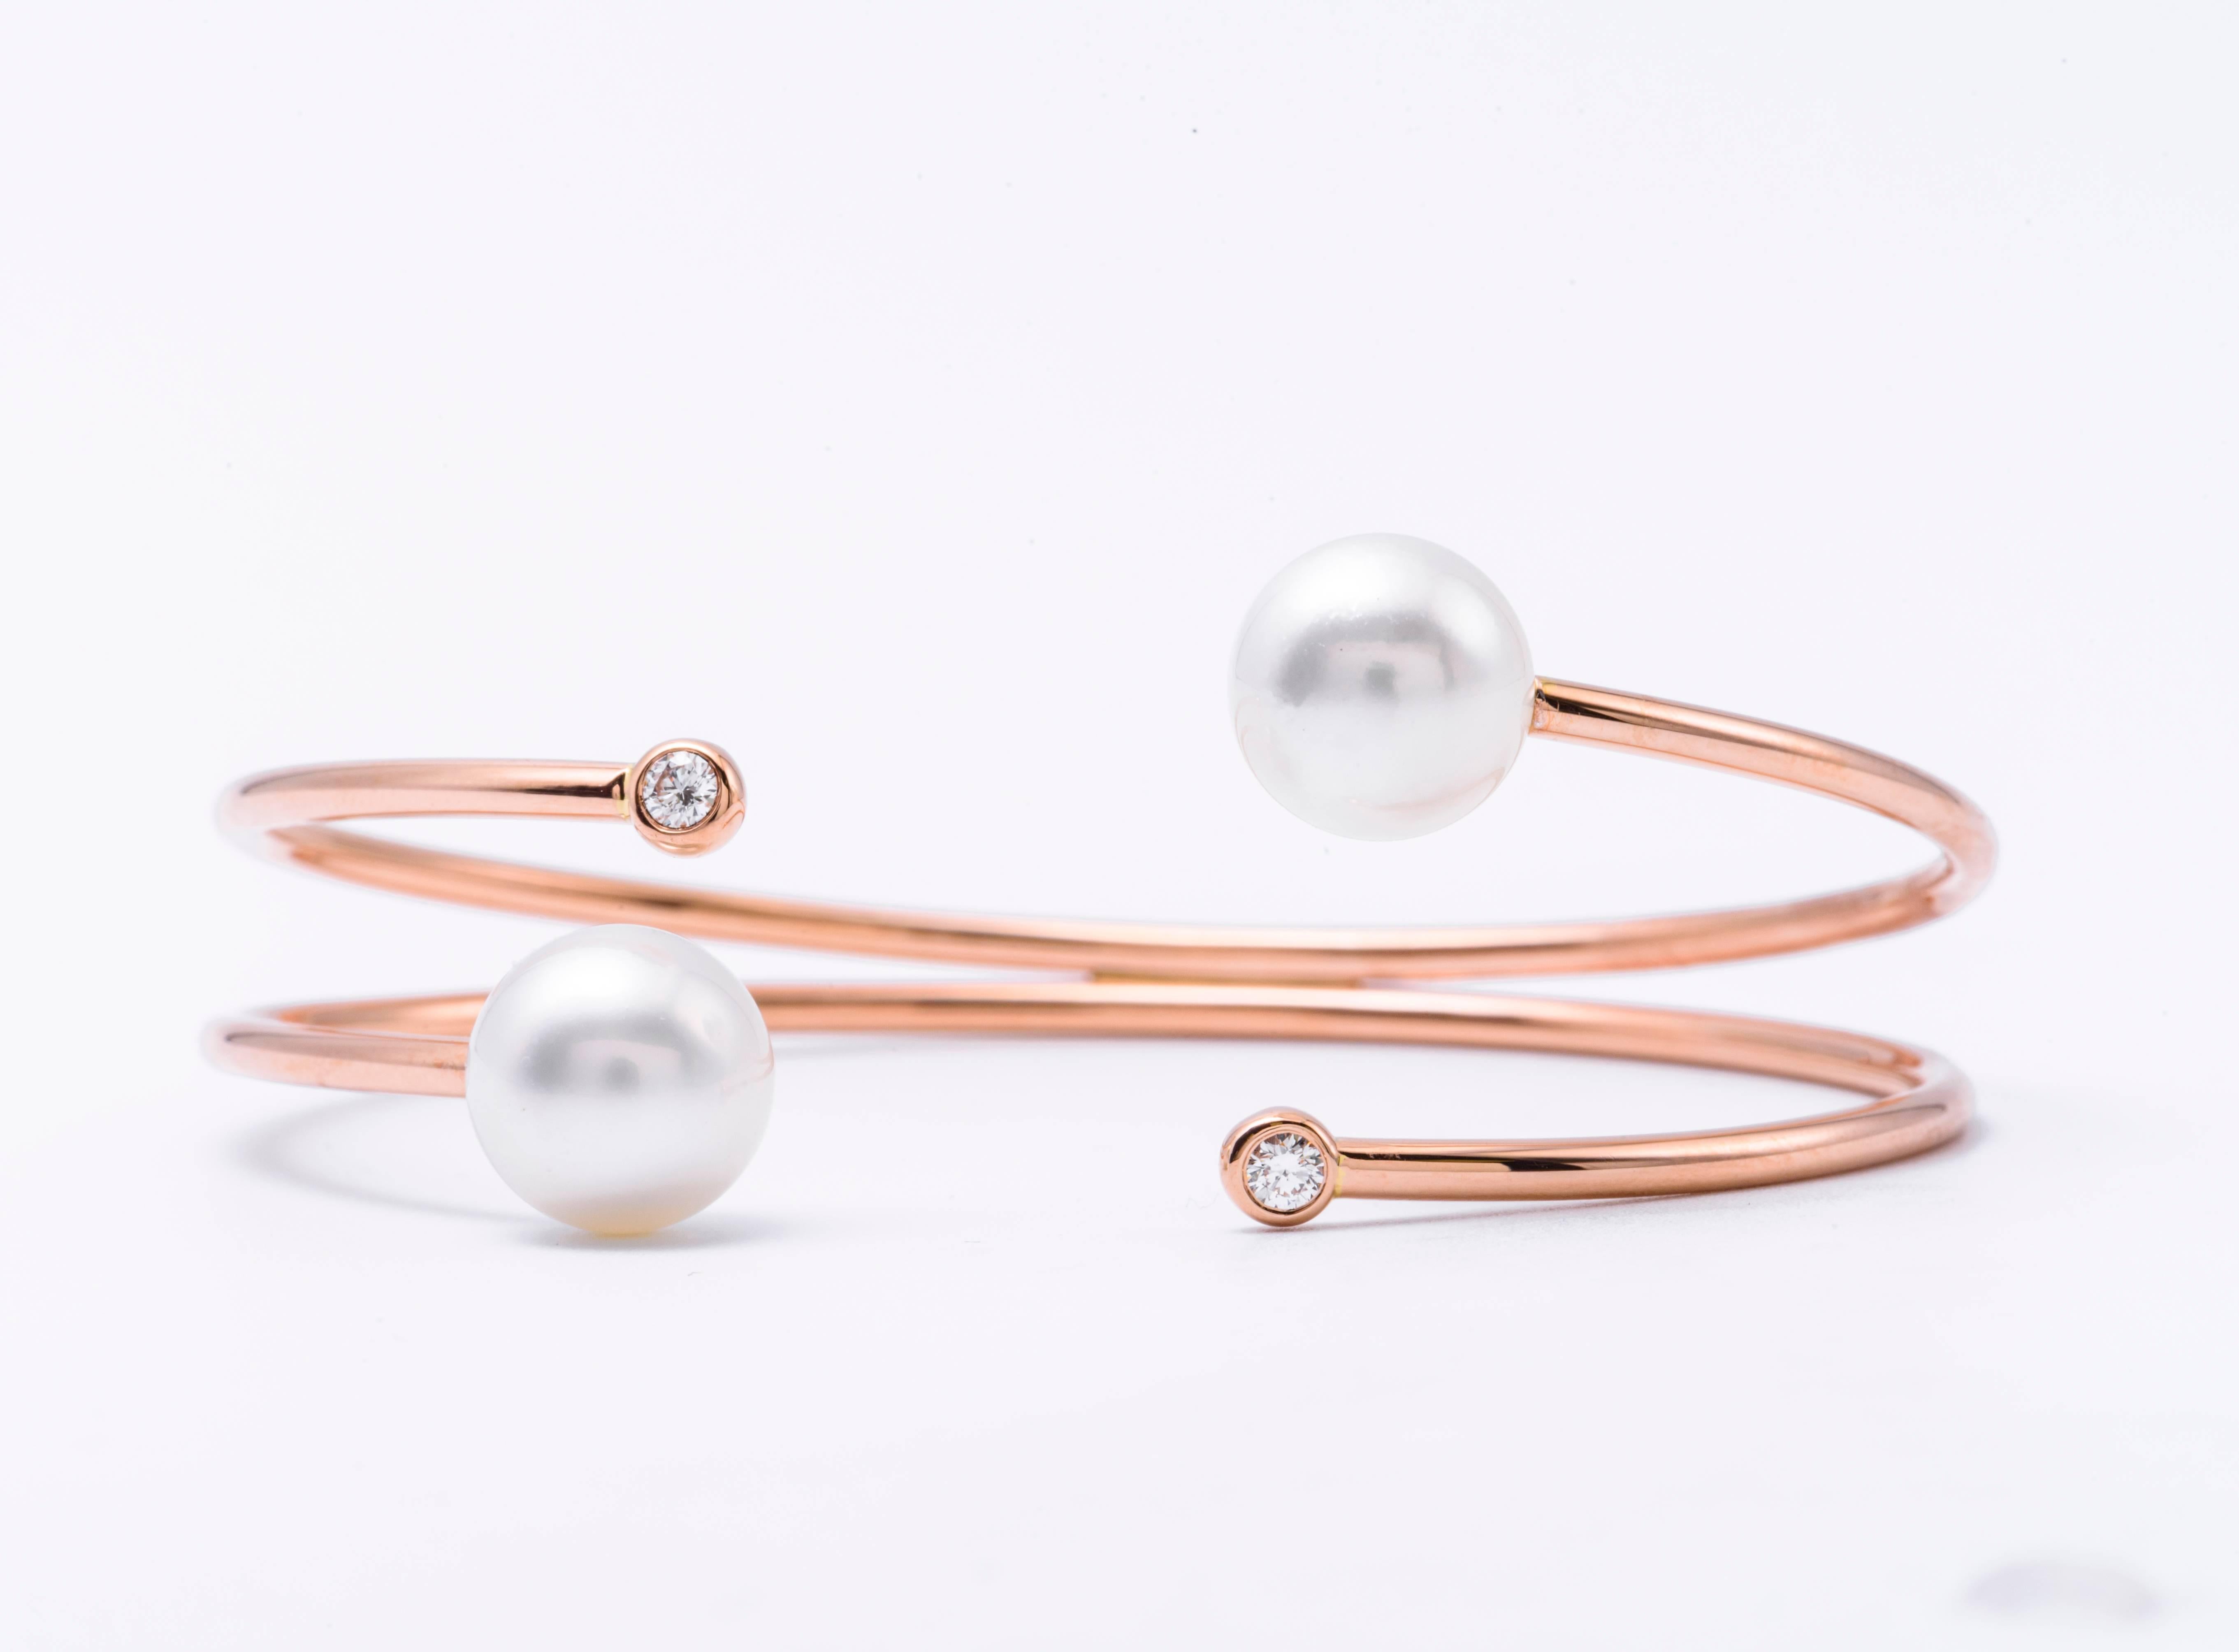 18K Rose gold bangle bracelet featuring two South Sea Pearls measuring 9.50-10 mm each and 2 round brilliants weighing 0.12 carats. 
Color G-H
Clarity SI

Pearls can be changed to Pink, Tahitian or Golden upon request. Price subject to change.